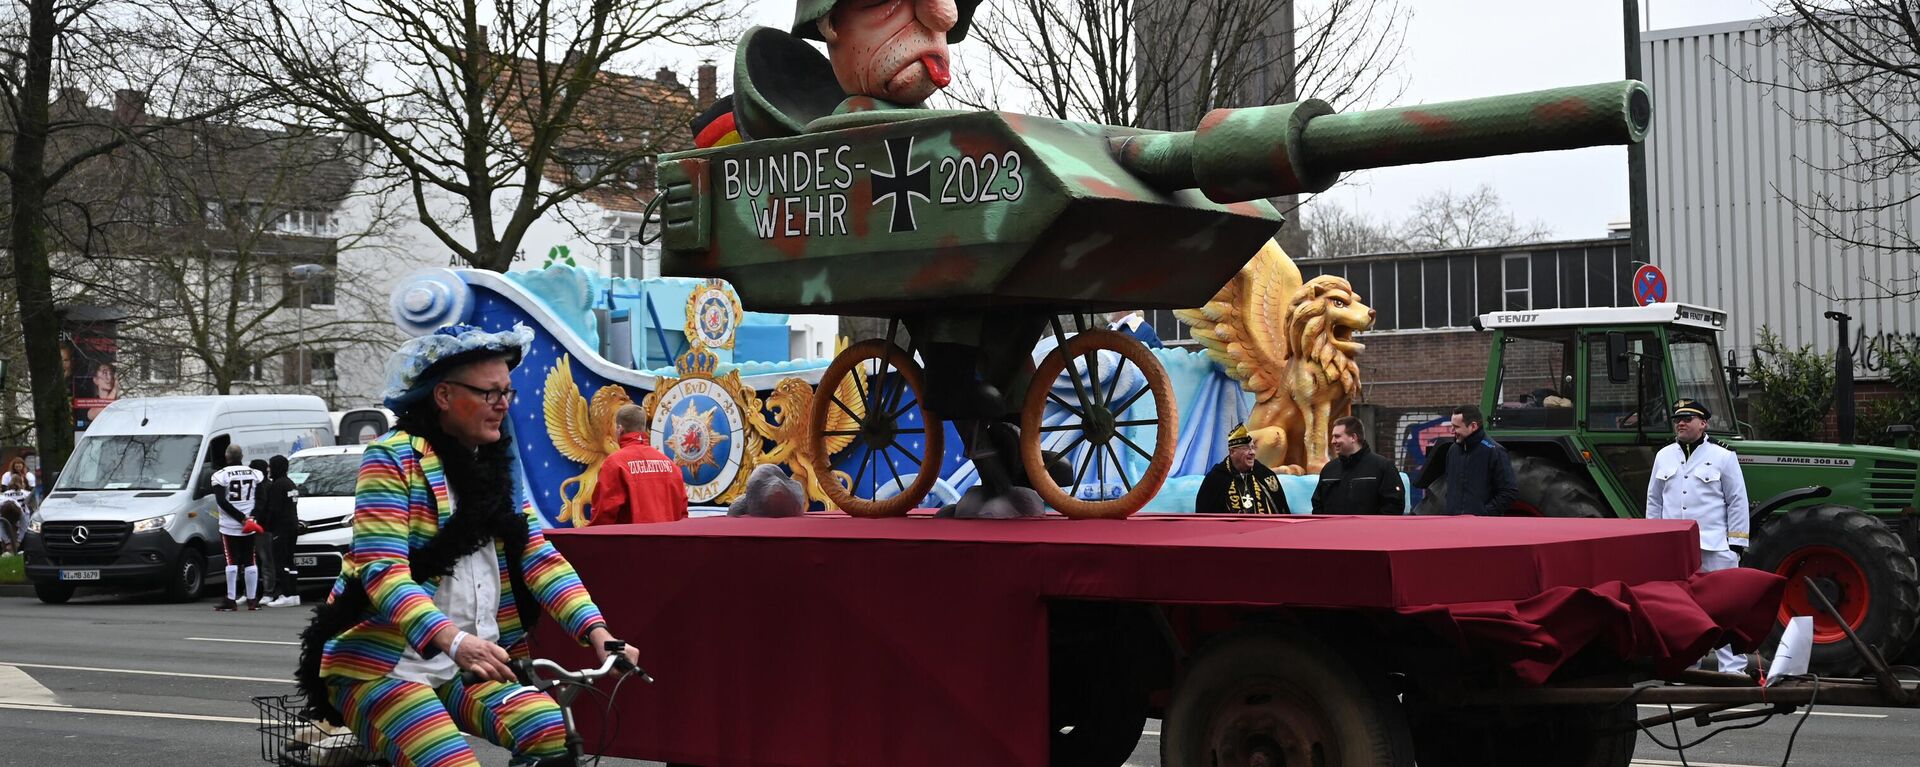 A carnival float mocks the current condition of the German armed Forces military equipment during a Rose Monday street carnival parade in Duesseldorf, western Germany, on February 20, 2023. - Sputnik International, 1920, 14.10.2023